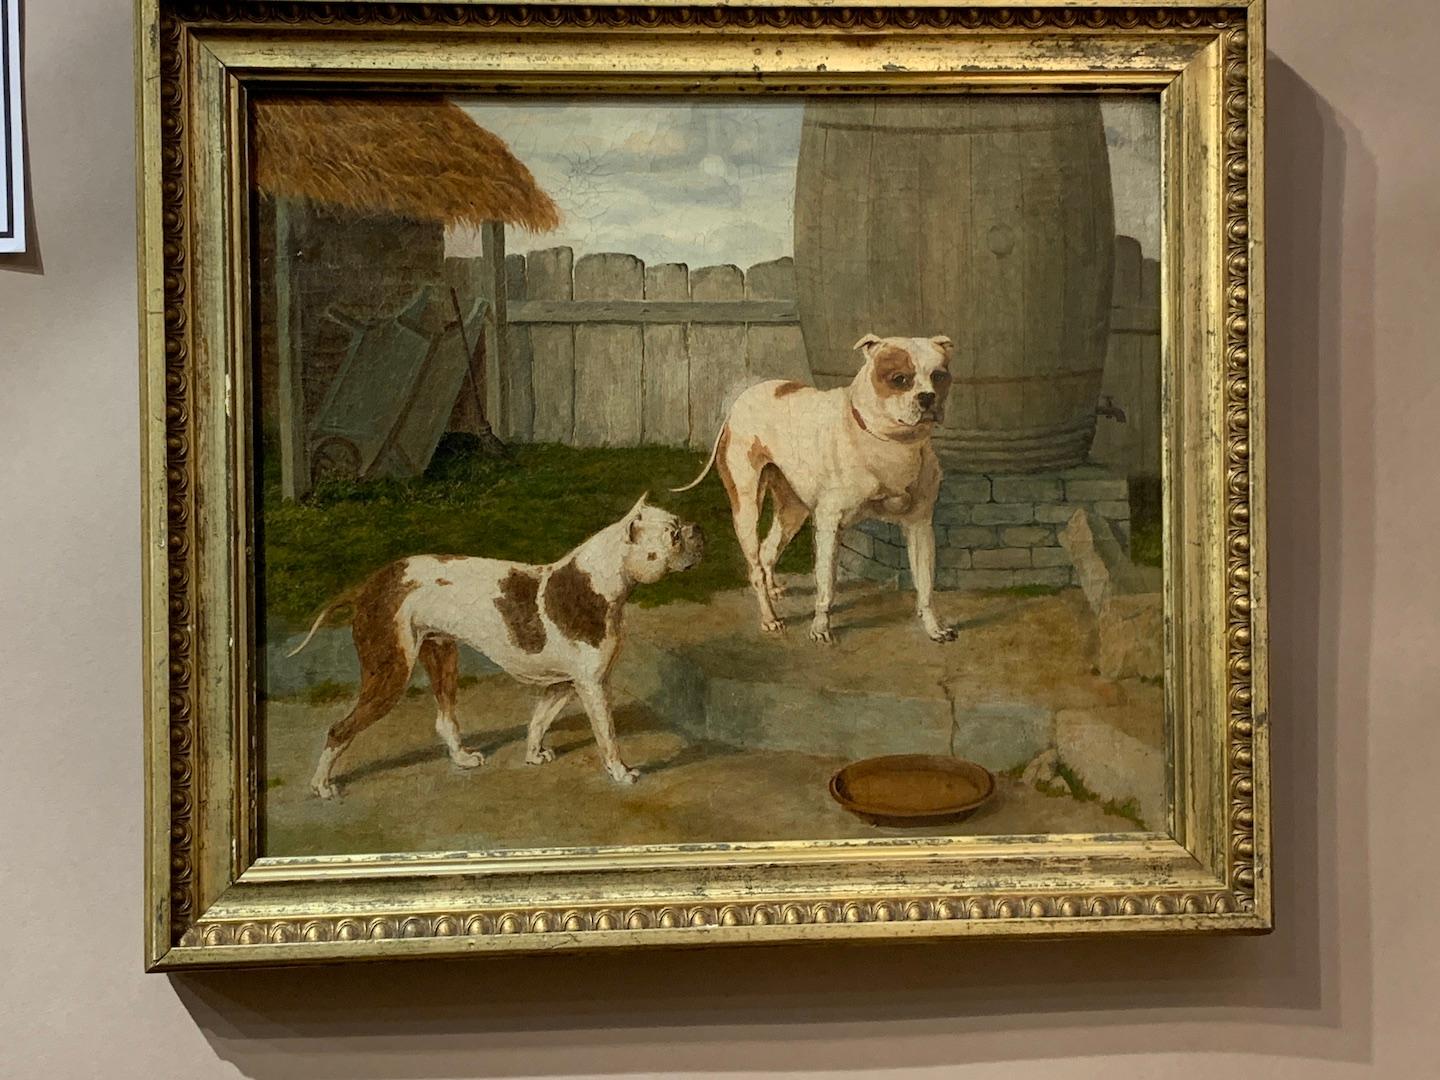 Antique 19th century English portrait two Bull Dogs in a yard. - Painting by John Frederick Herring Sr.